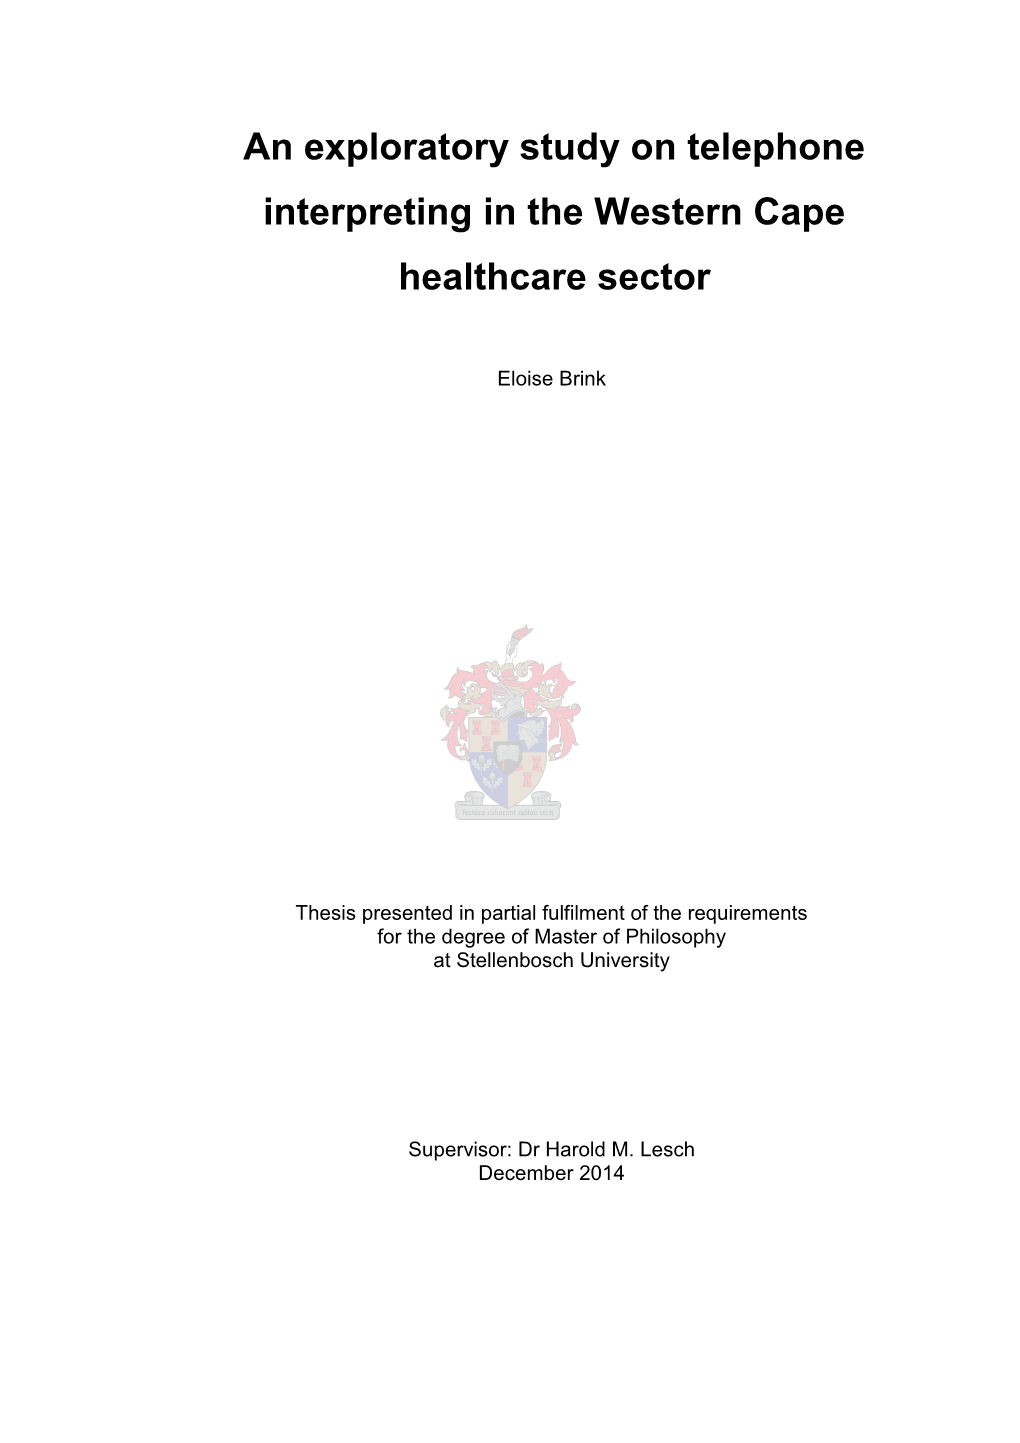 An Exploratory Study on Telephone Interpreting in the Western Cape Healthcare Sector